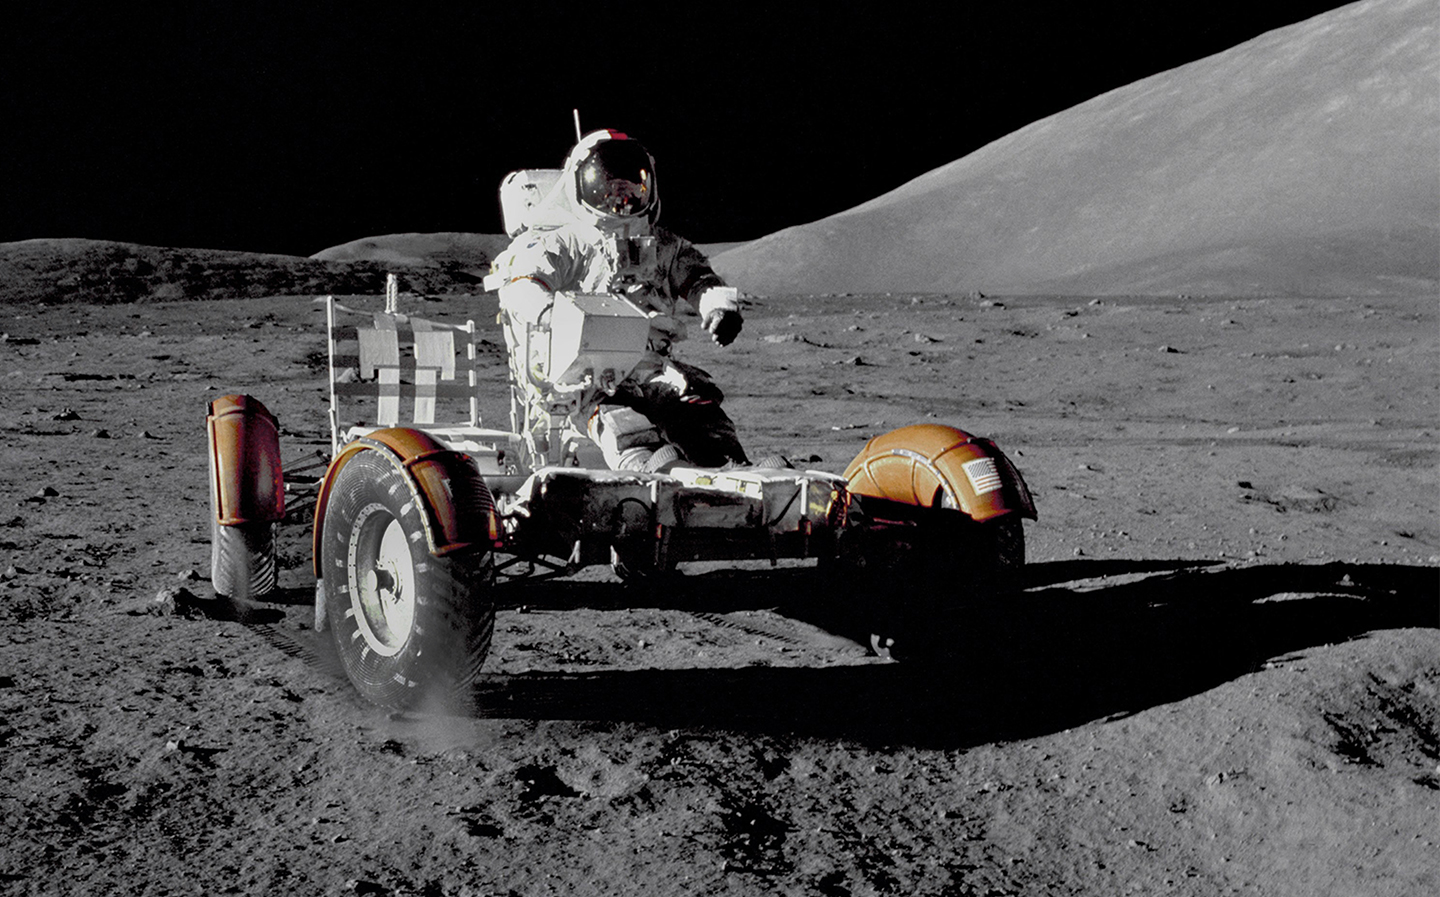 Apollo 17 commander Eugene A. Cernan rides the Lunar Roving Vehicle (LVR) during his first space walk at the Taurus-Littrow landing site becoming the last man to walk on the Moon on December 12, 1972